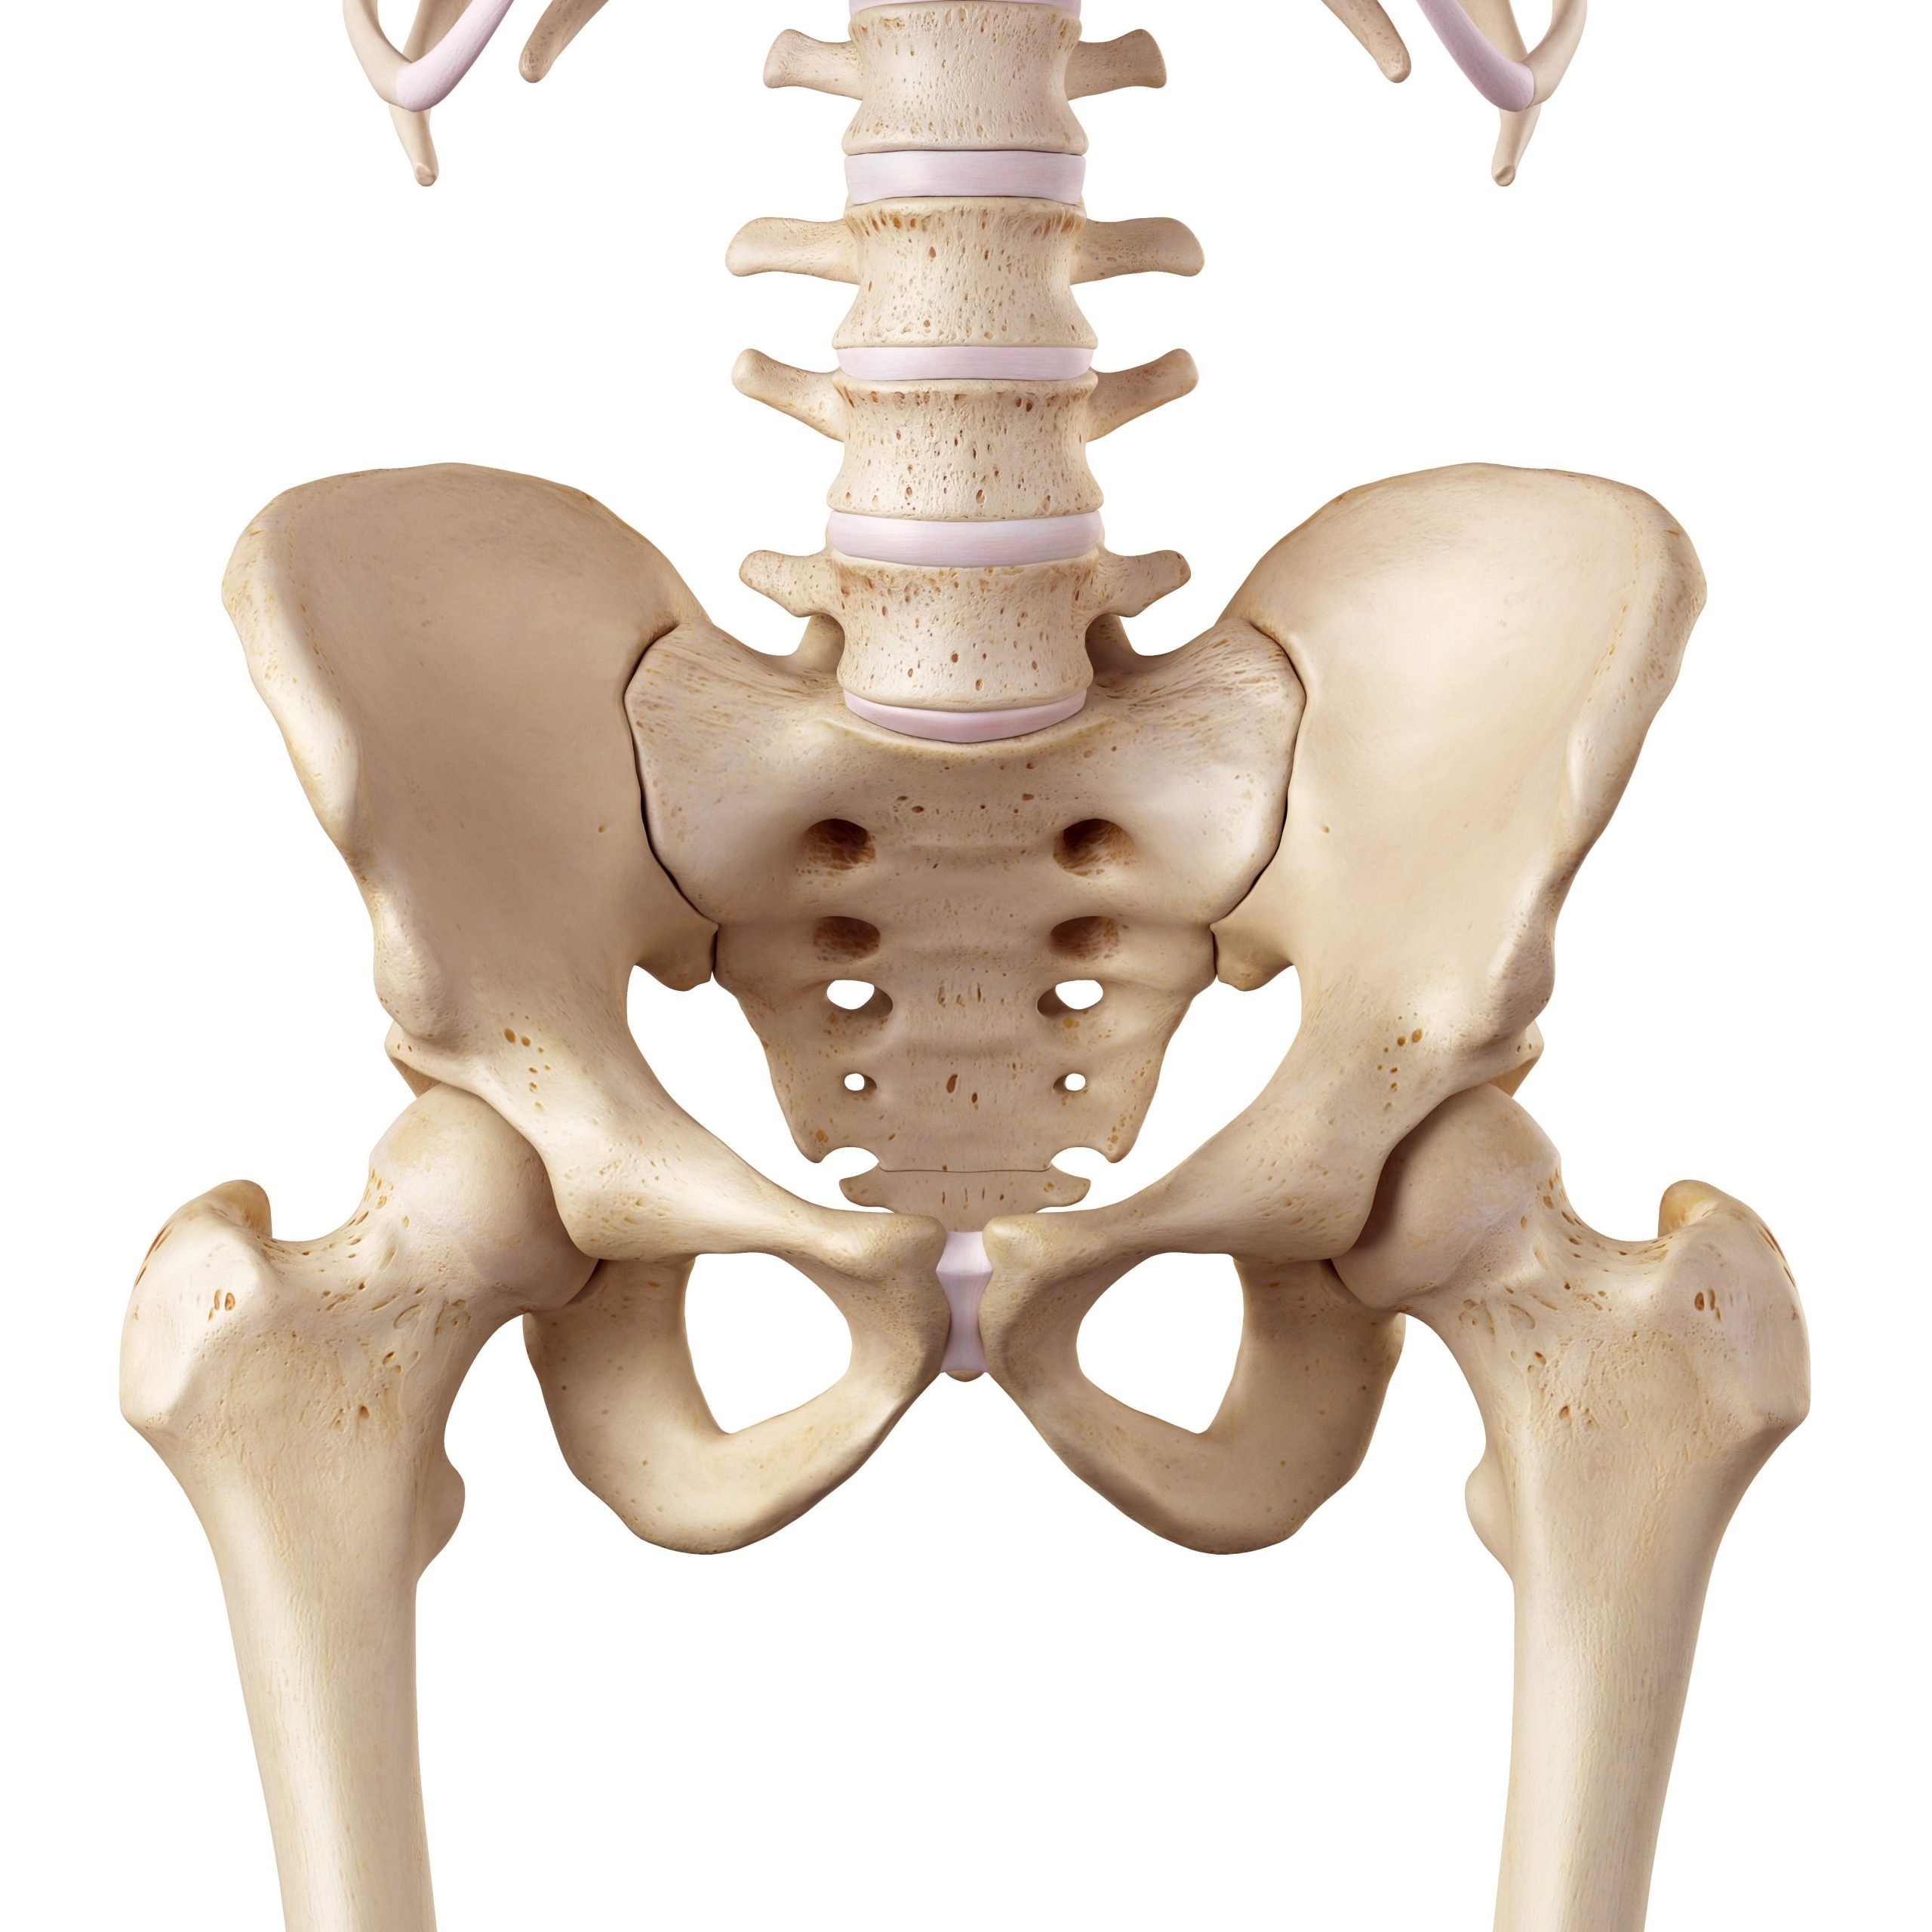 Hip - Anatomy of the Hip - AOA Orthopedic Specialists